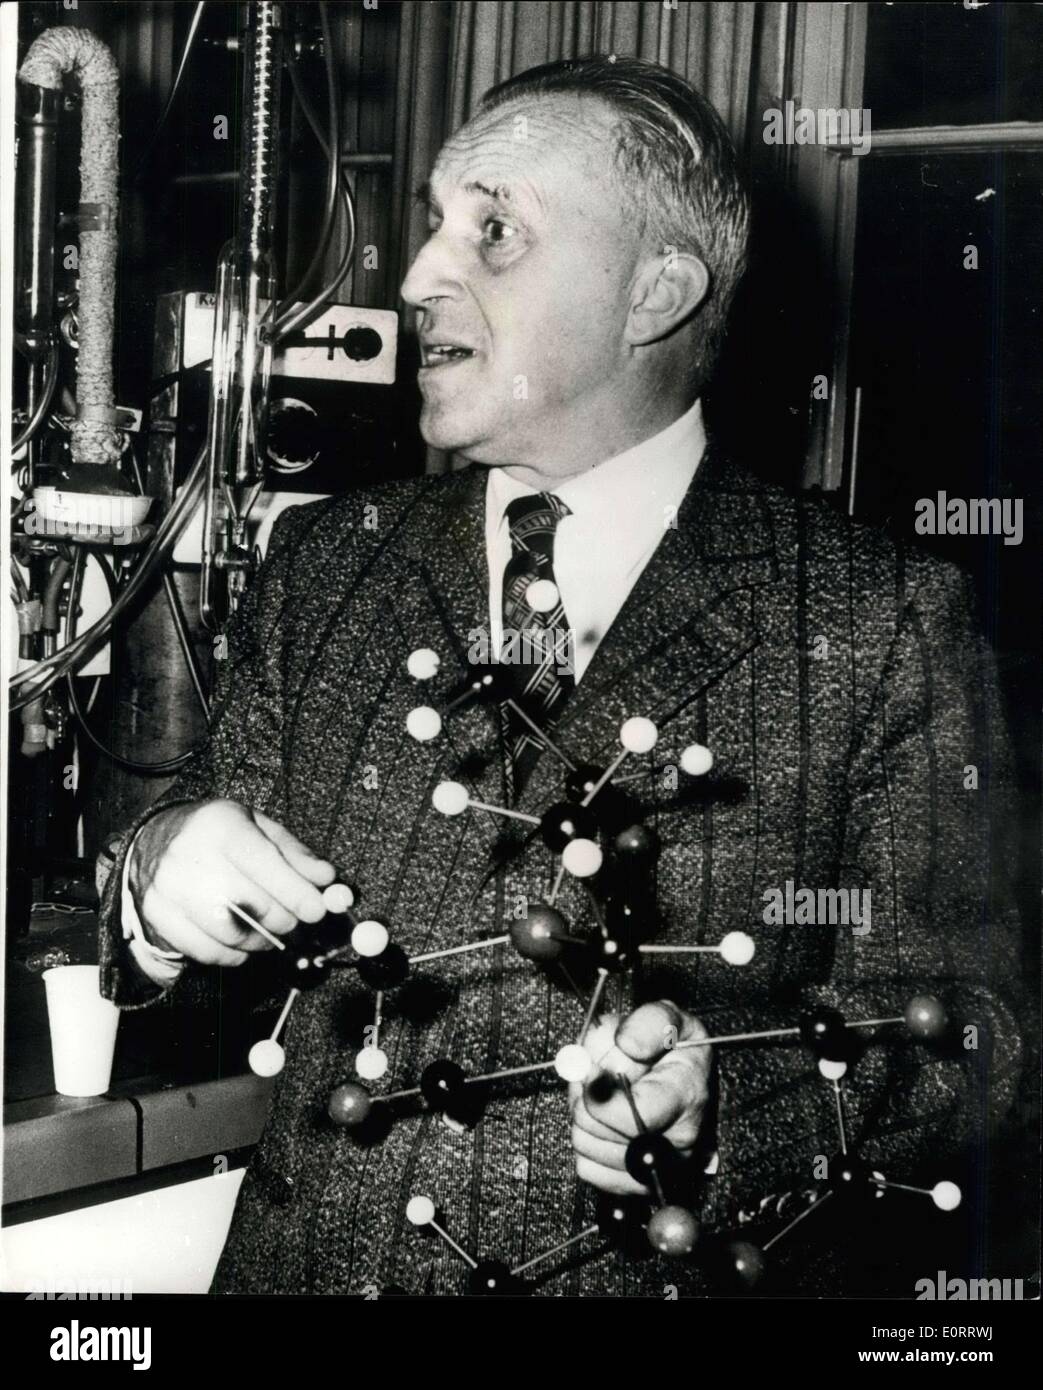 May 08, 1960 - Nobel Prize Winner: Photo Shows Dr. Ernst Otto Fischer, of Professor of Inorganic Chemistry at Munich University, who shares the Nobel Prize for Chemistry with Dr. Wilkinson, Professor of Inorganic Chemistry at Imperial College, London. Stock Photo